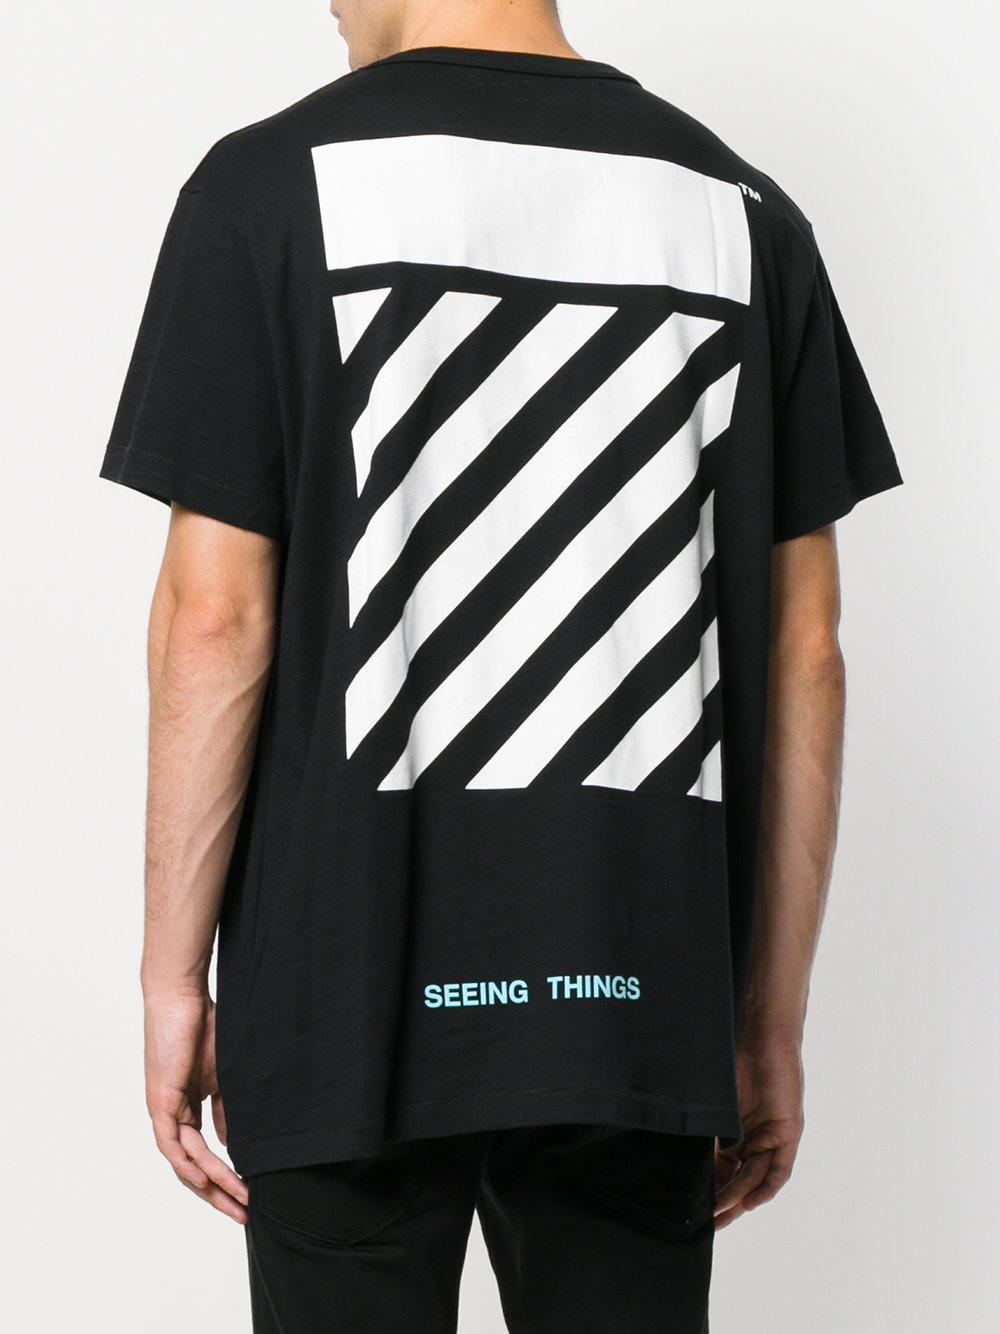 Off-White c/o Virgil Cotton Seeing Things T-shirt in Black for Men - Lyst